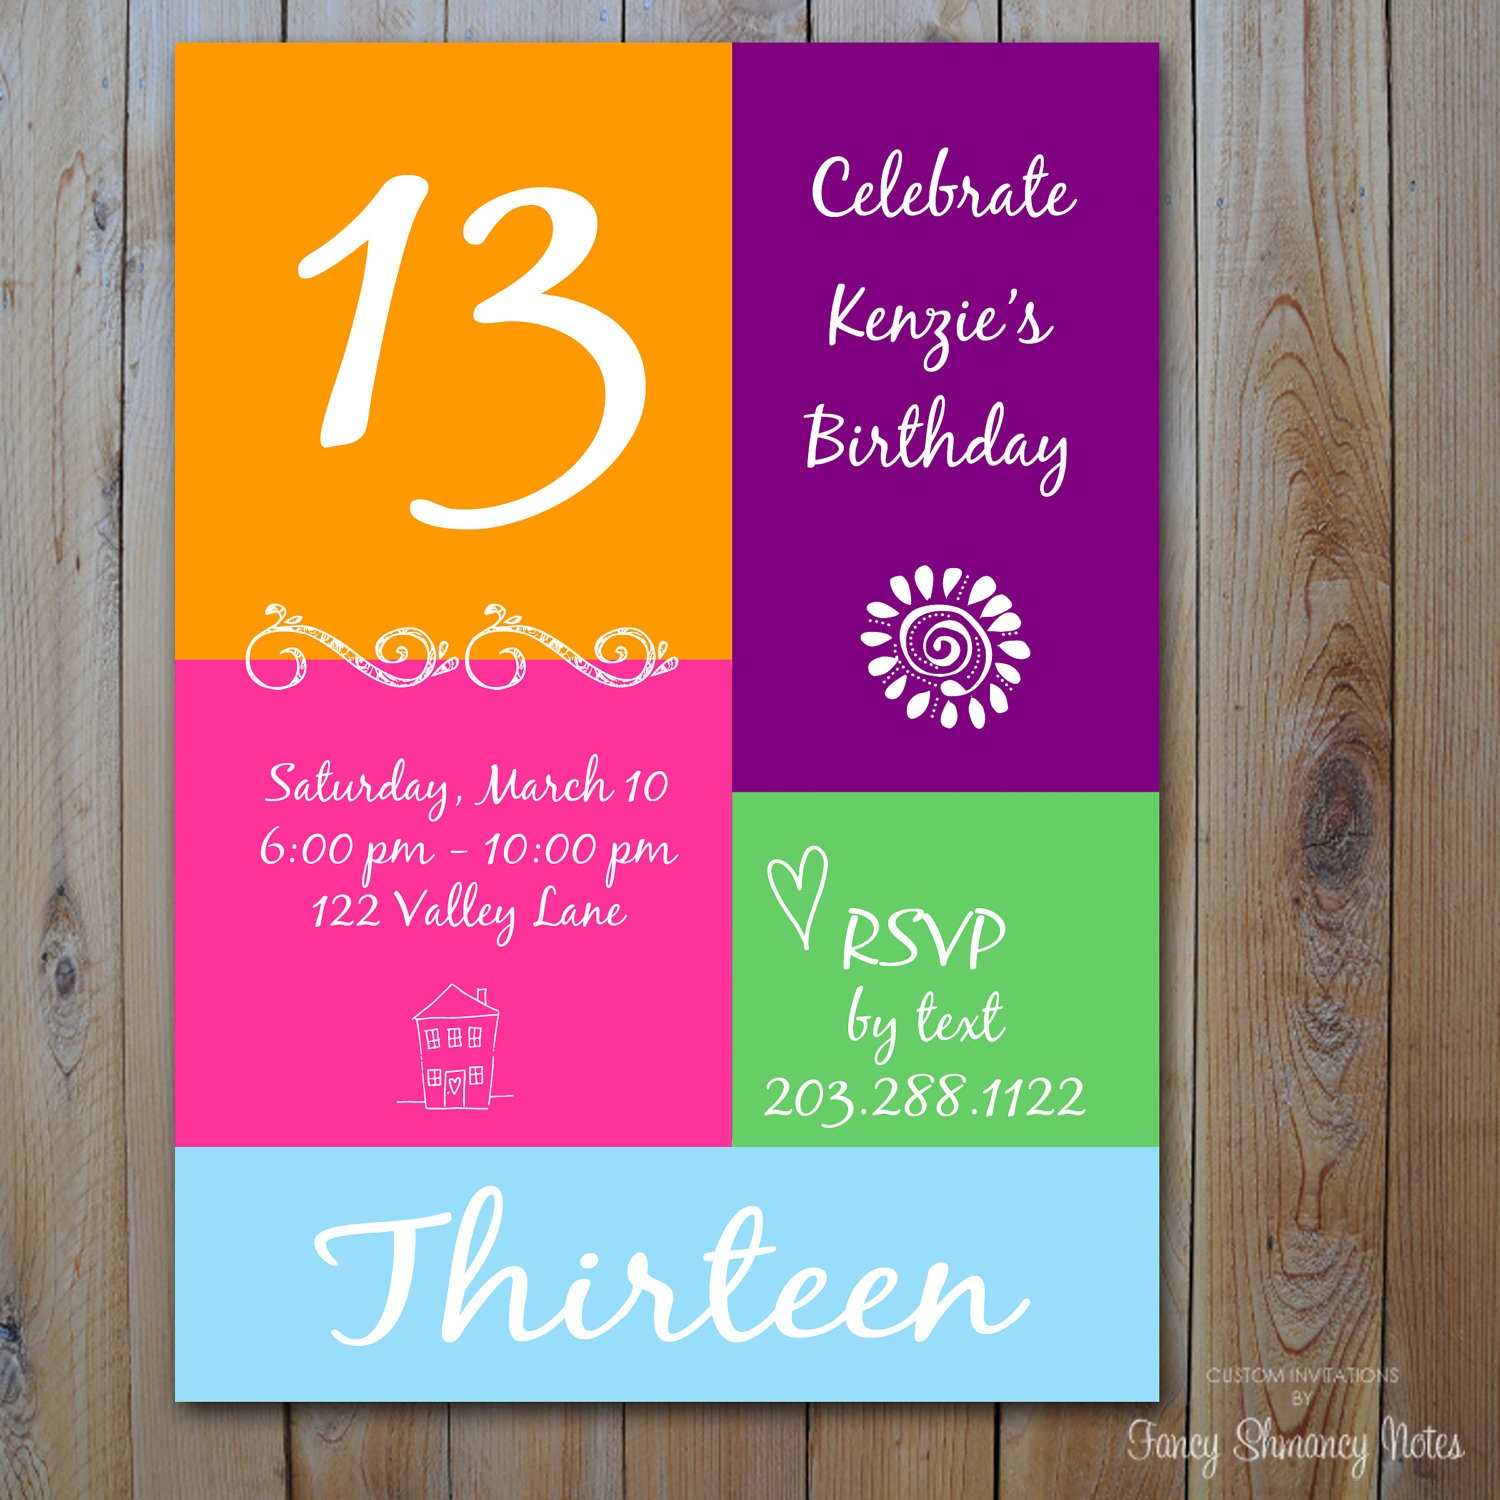 13 Birthday Card Ideas Party Invitations Cards 13th Birthday Party Invitations Boys 13th